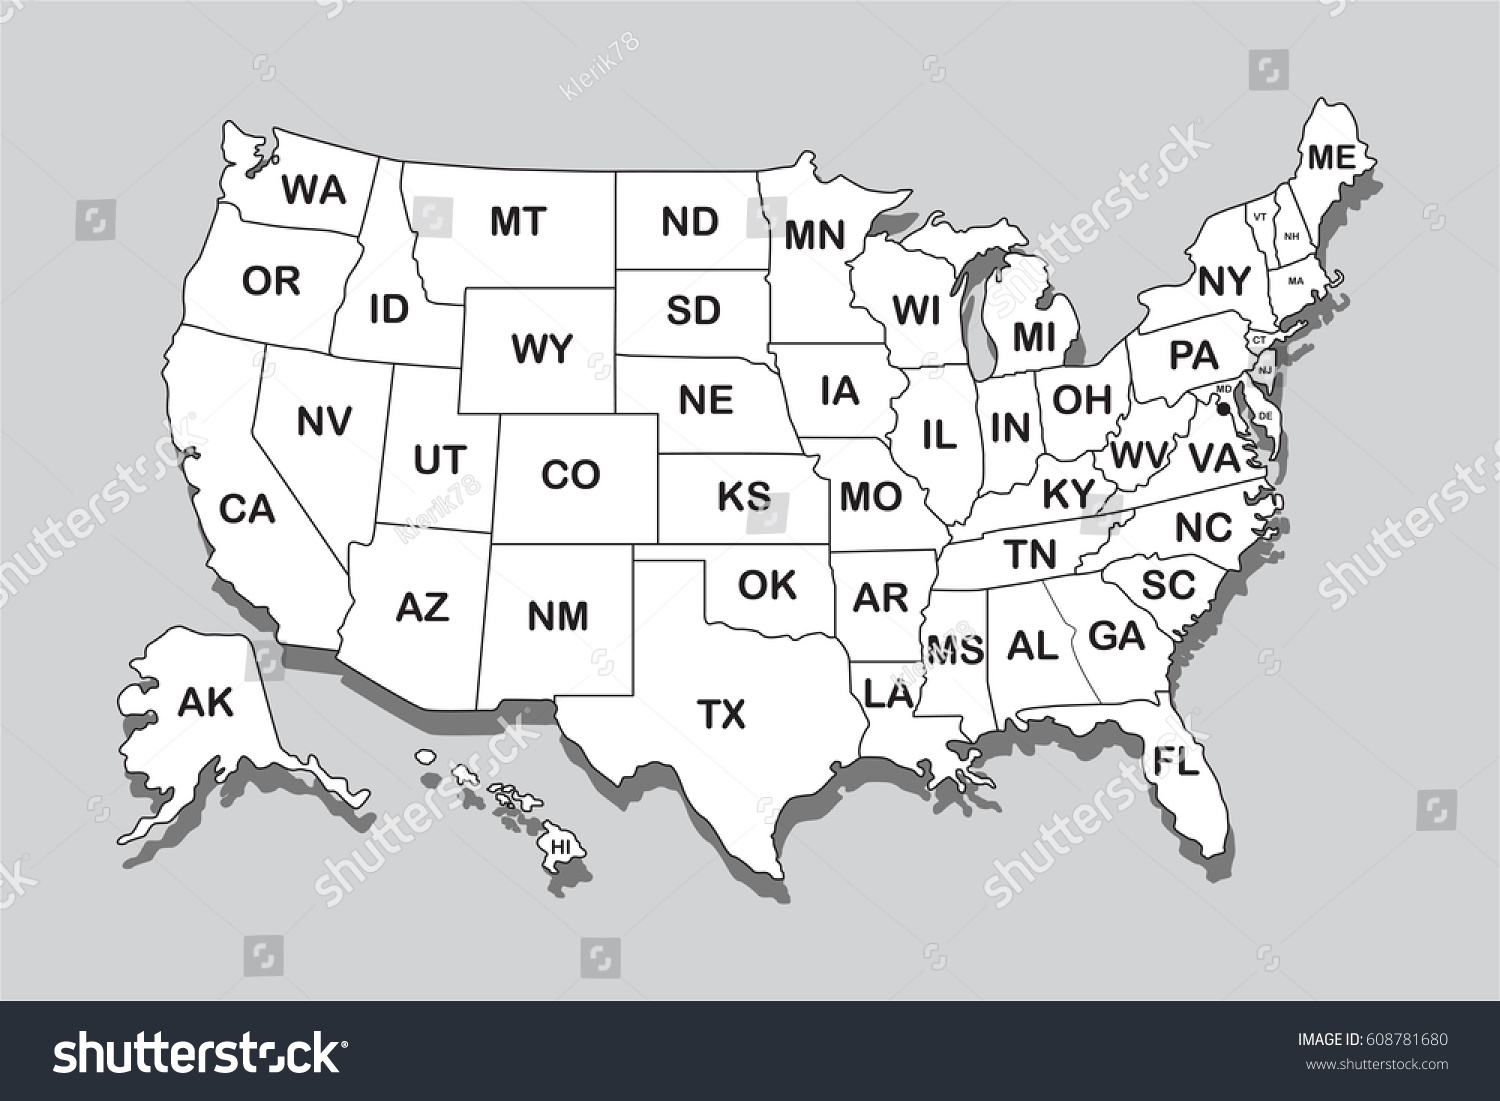 Poster Map United States America State Stock Vector Royalty Free 608781680 Shutterstock 